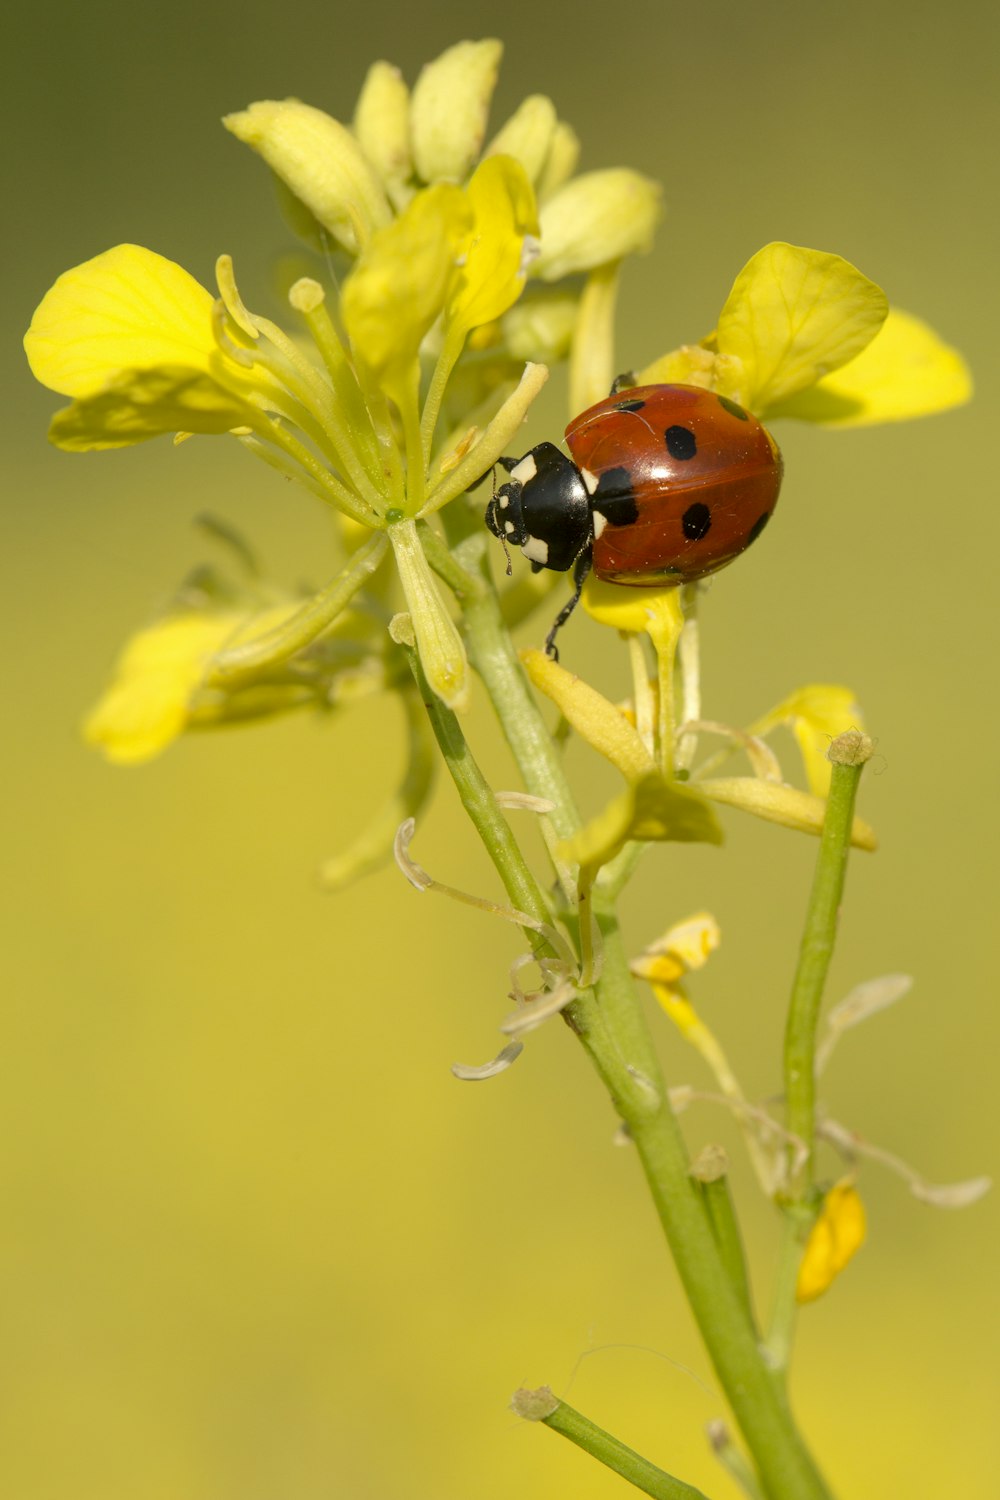 red and black ladybug on yellow flower